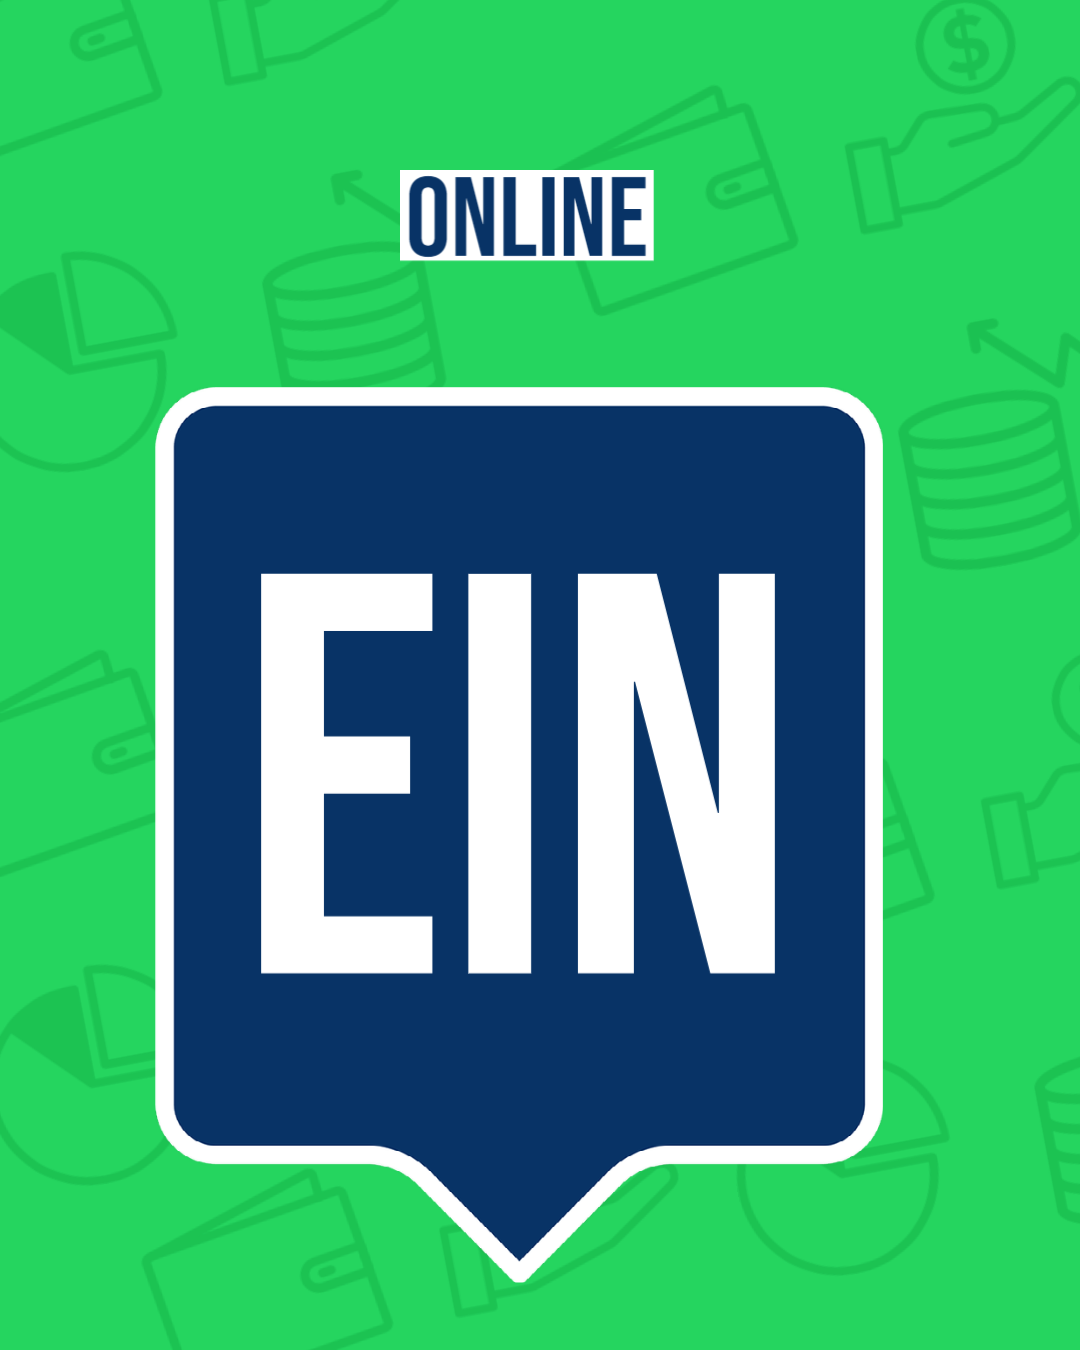 IRS EIN ONLINE FOR NON USA RESIDENTS